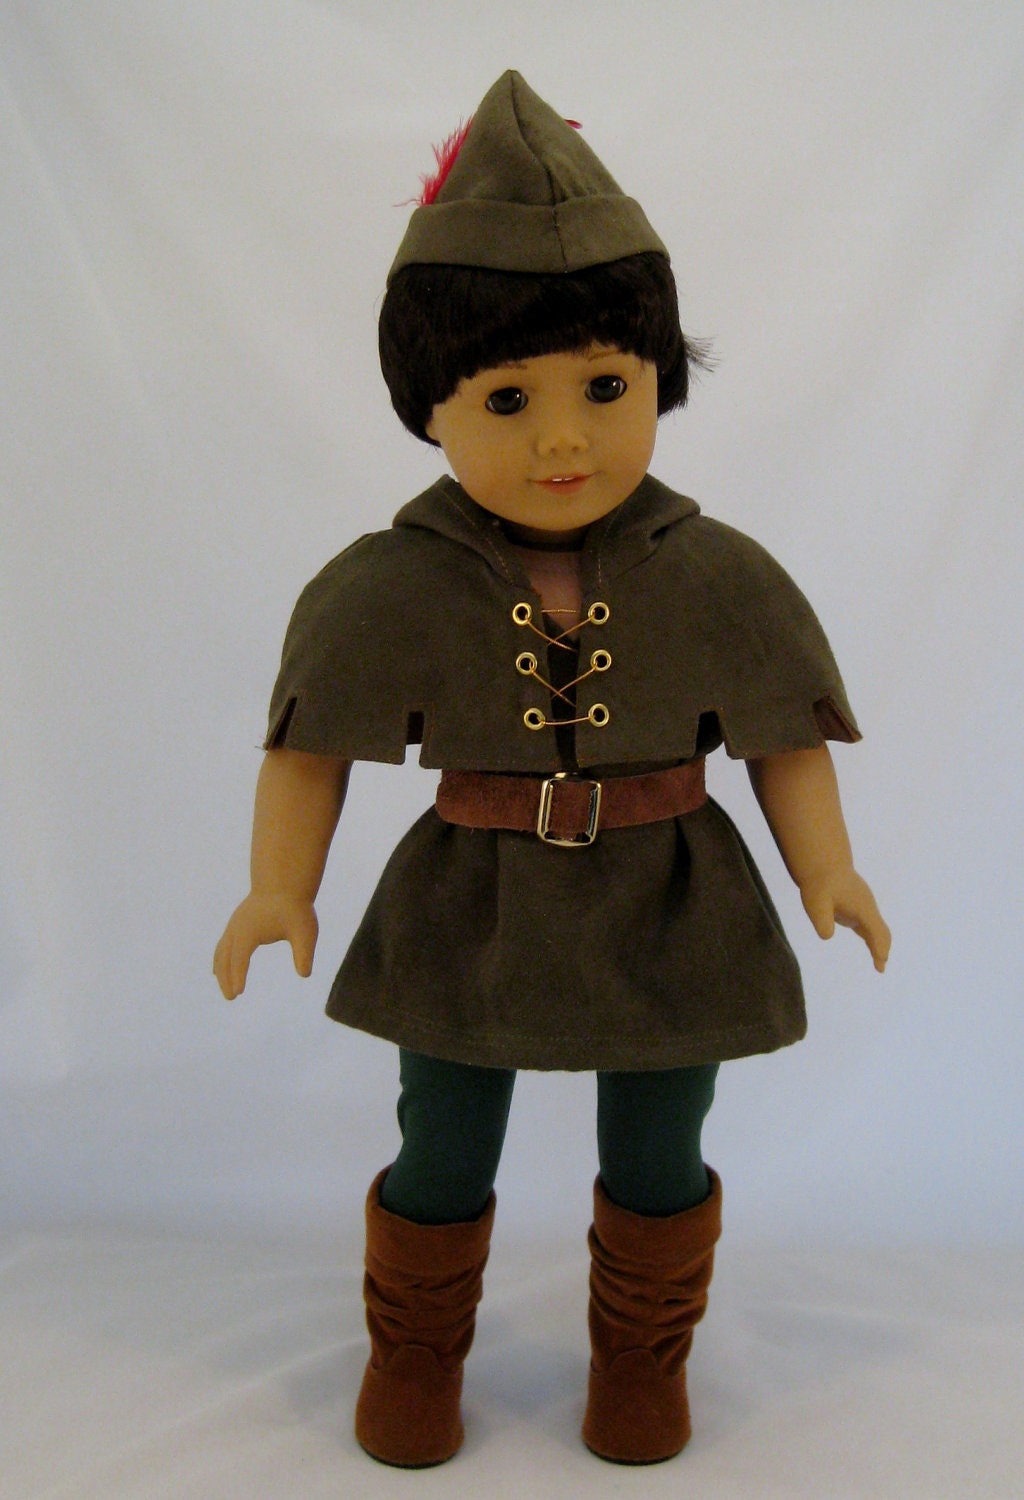 Robin Hood costume sized to fit American Girl or other 18 inch Dolls